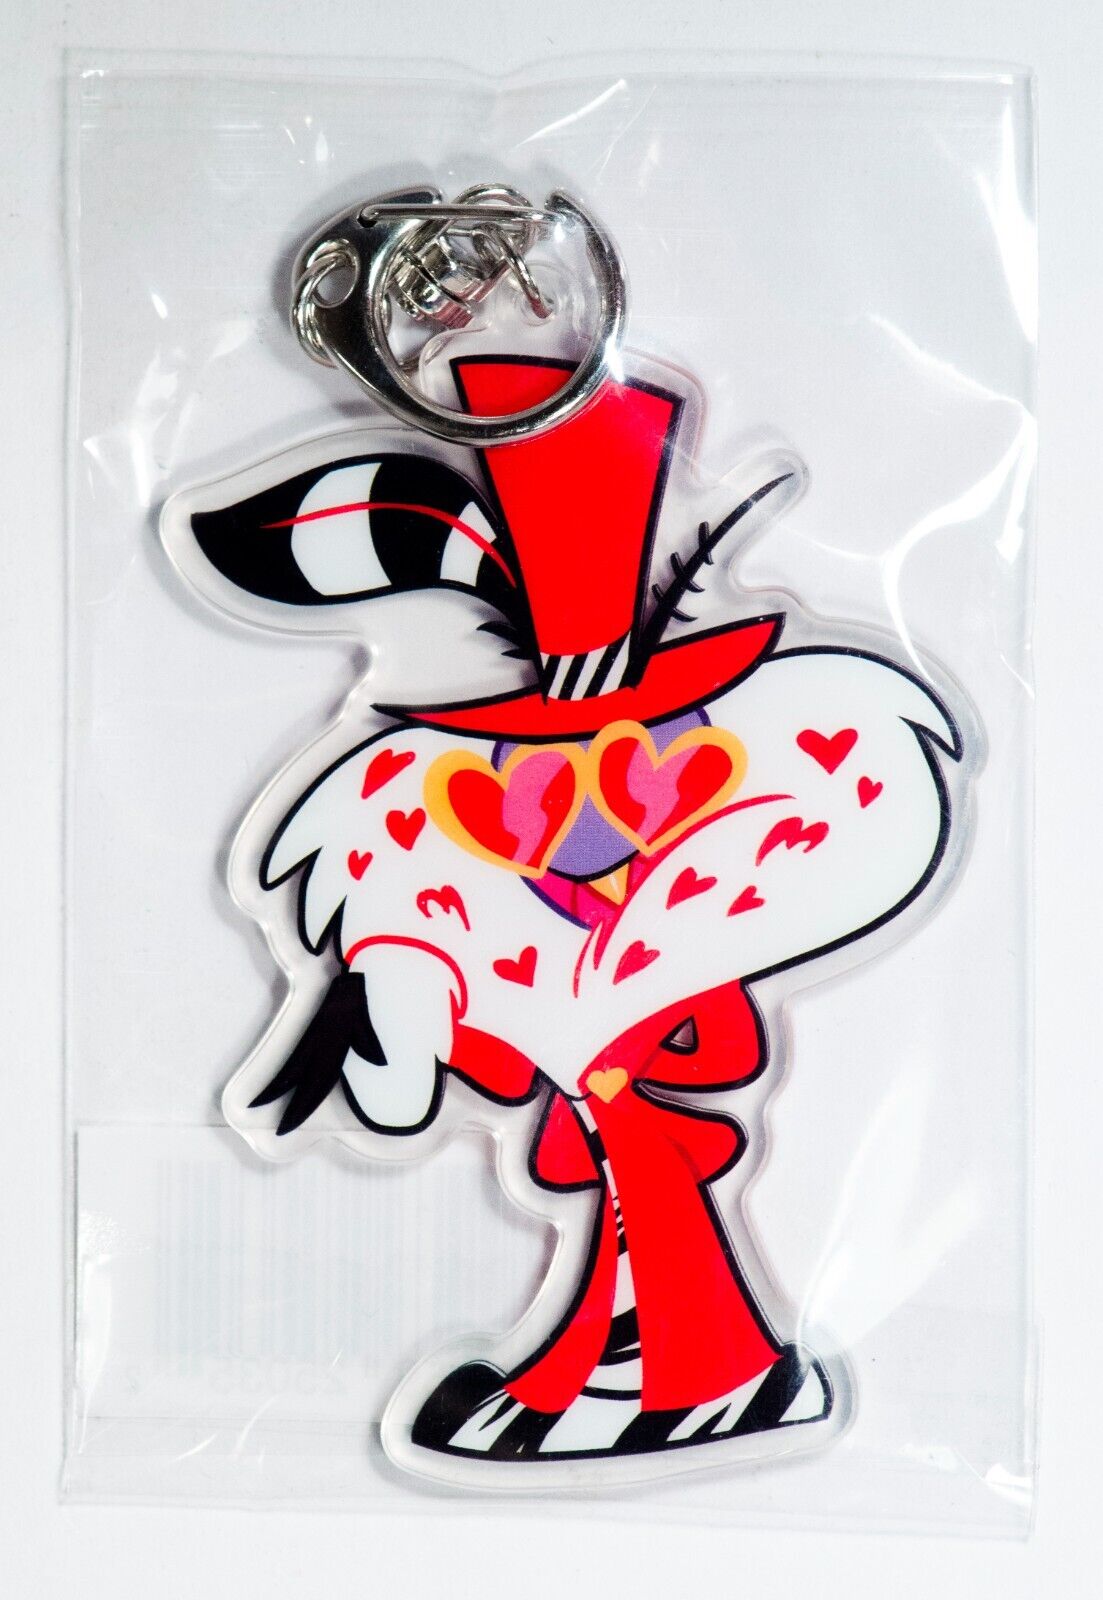 Hazbin Hotel Official VALENTINO Acrylic Keychain - RARE - SOLD OUT/DISCONTINUED